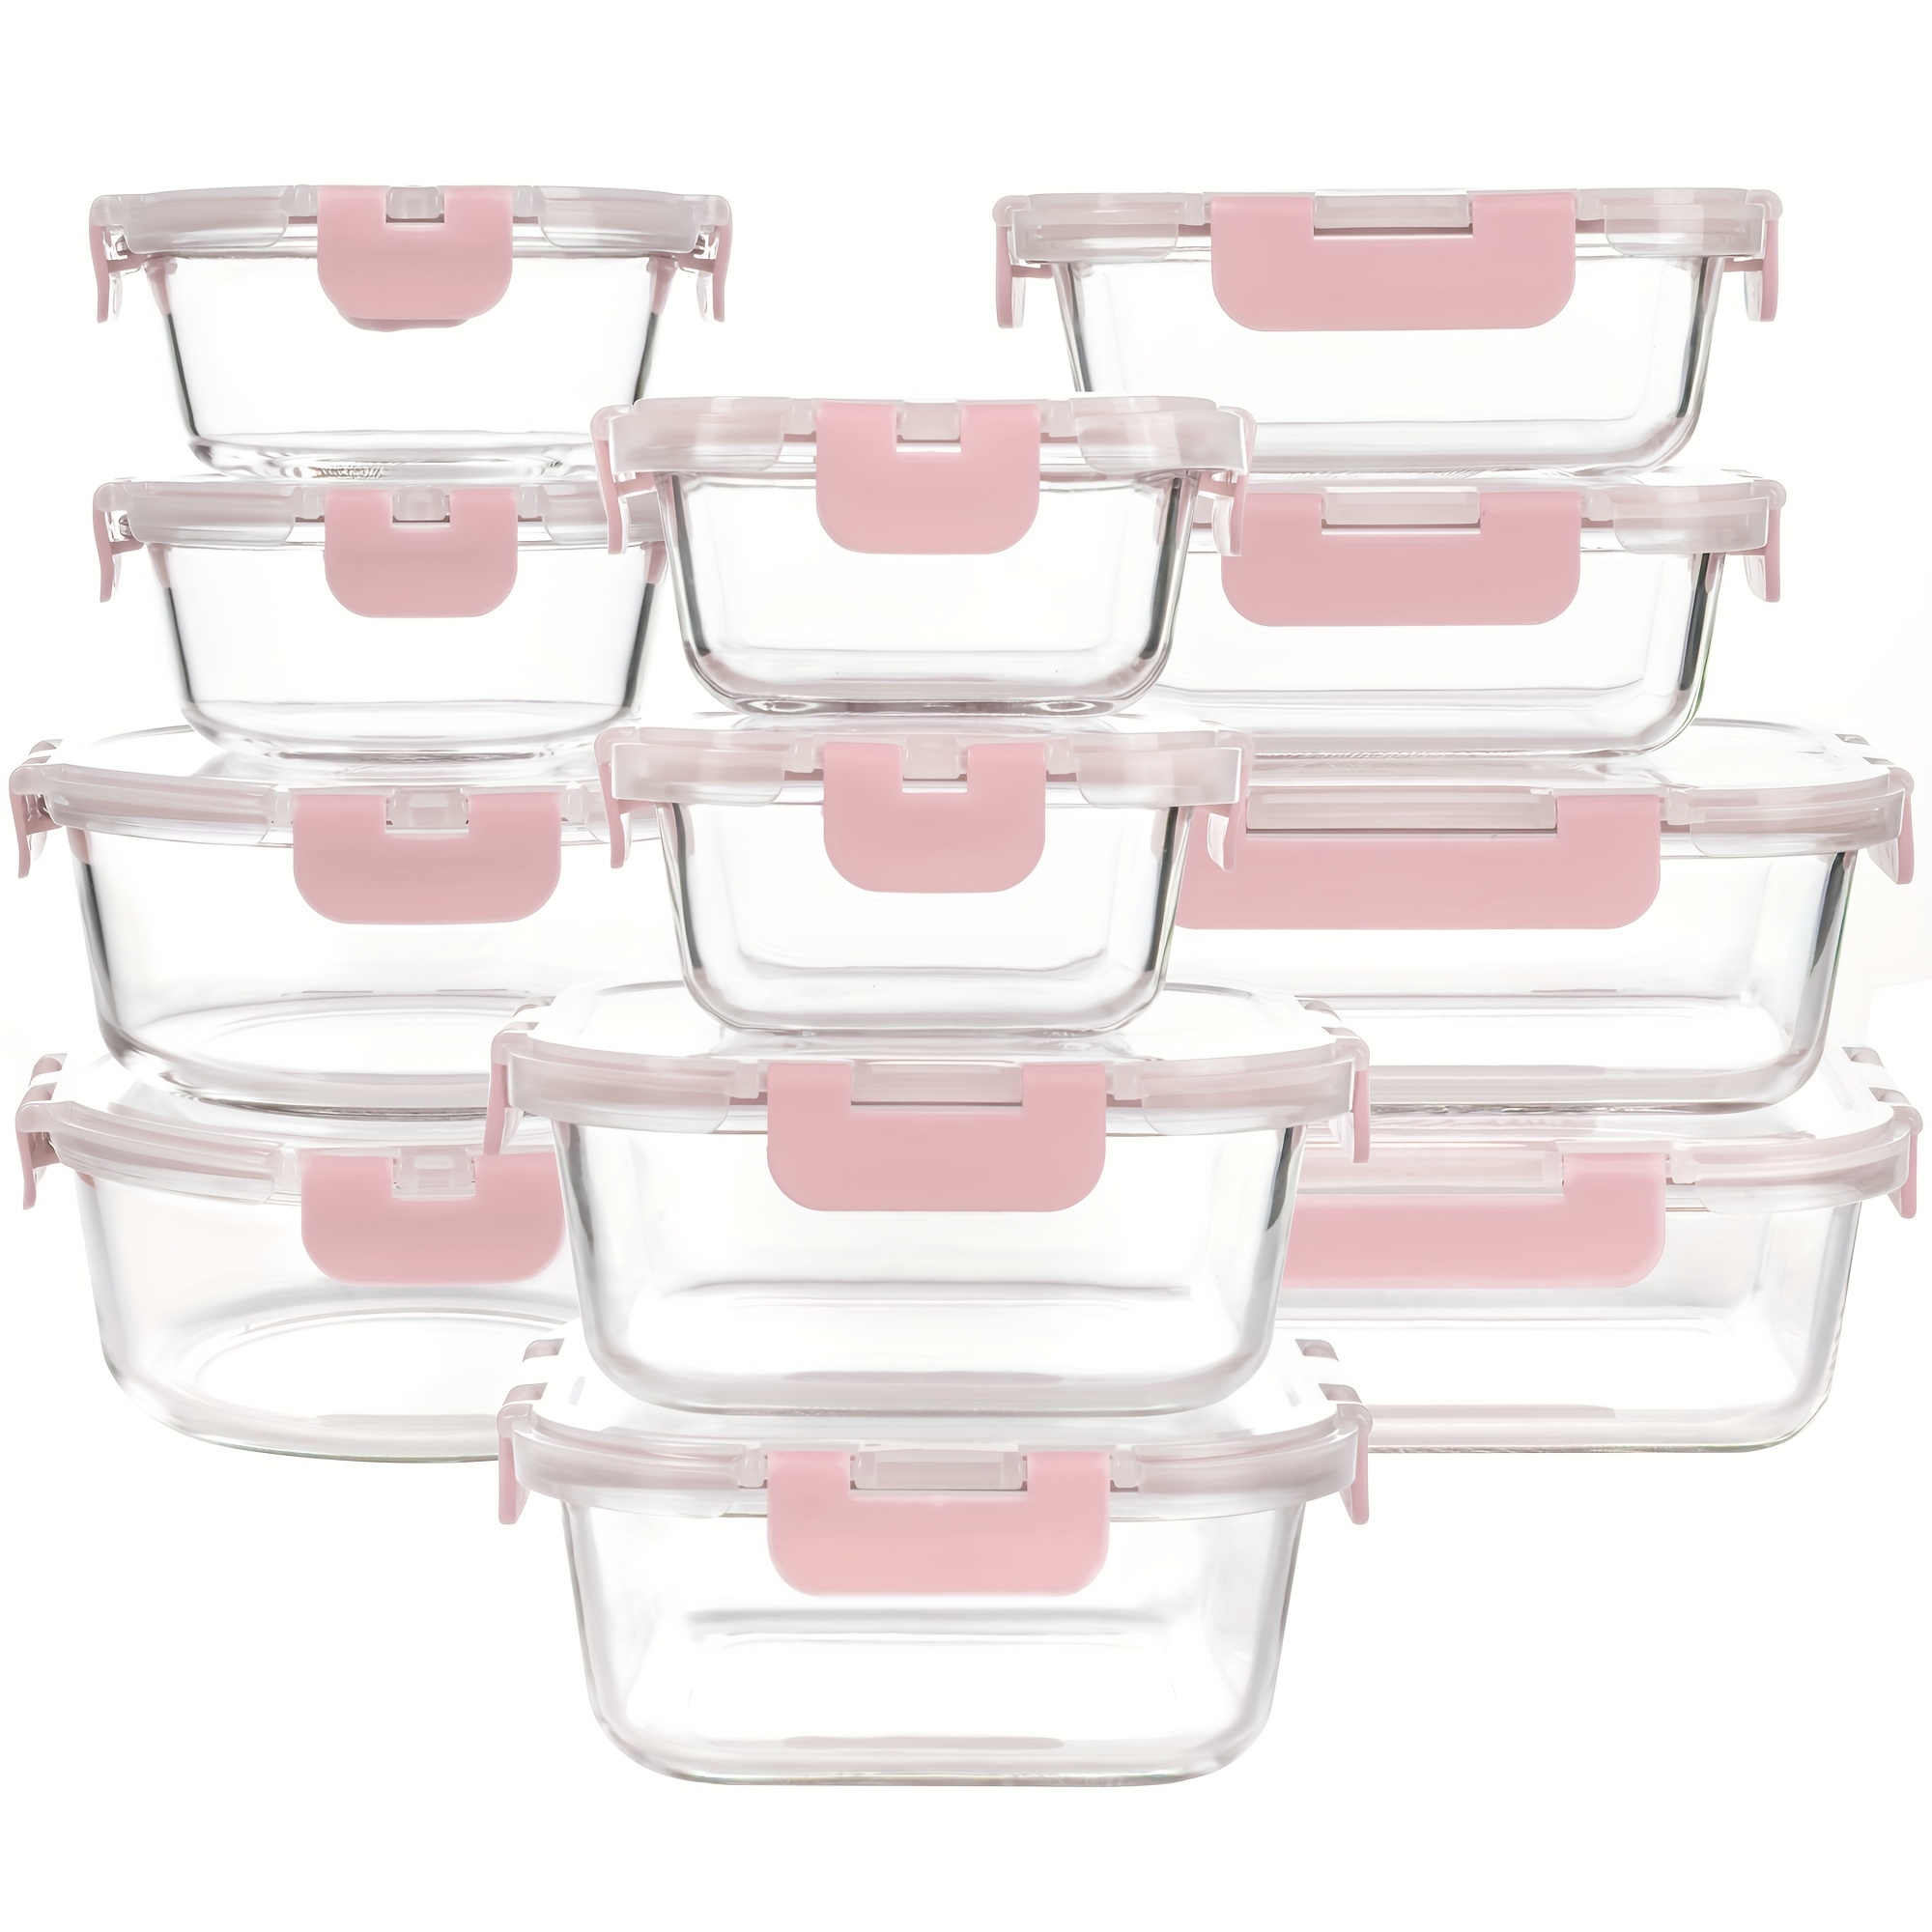 

12 Pack Glass Food Storage Containers Set, Glass Meal Prep Containers With Leak Proof Lids, Airtight Glass Lunch Containers, Ideal For Food Storage, On-the-go, Leftover